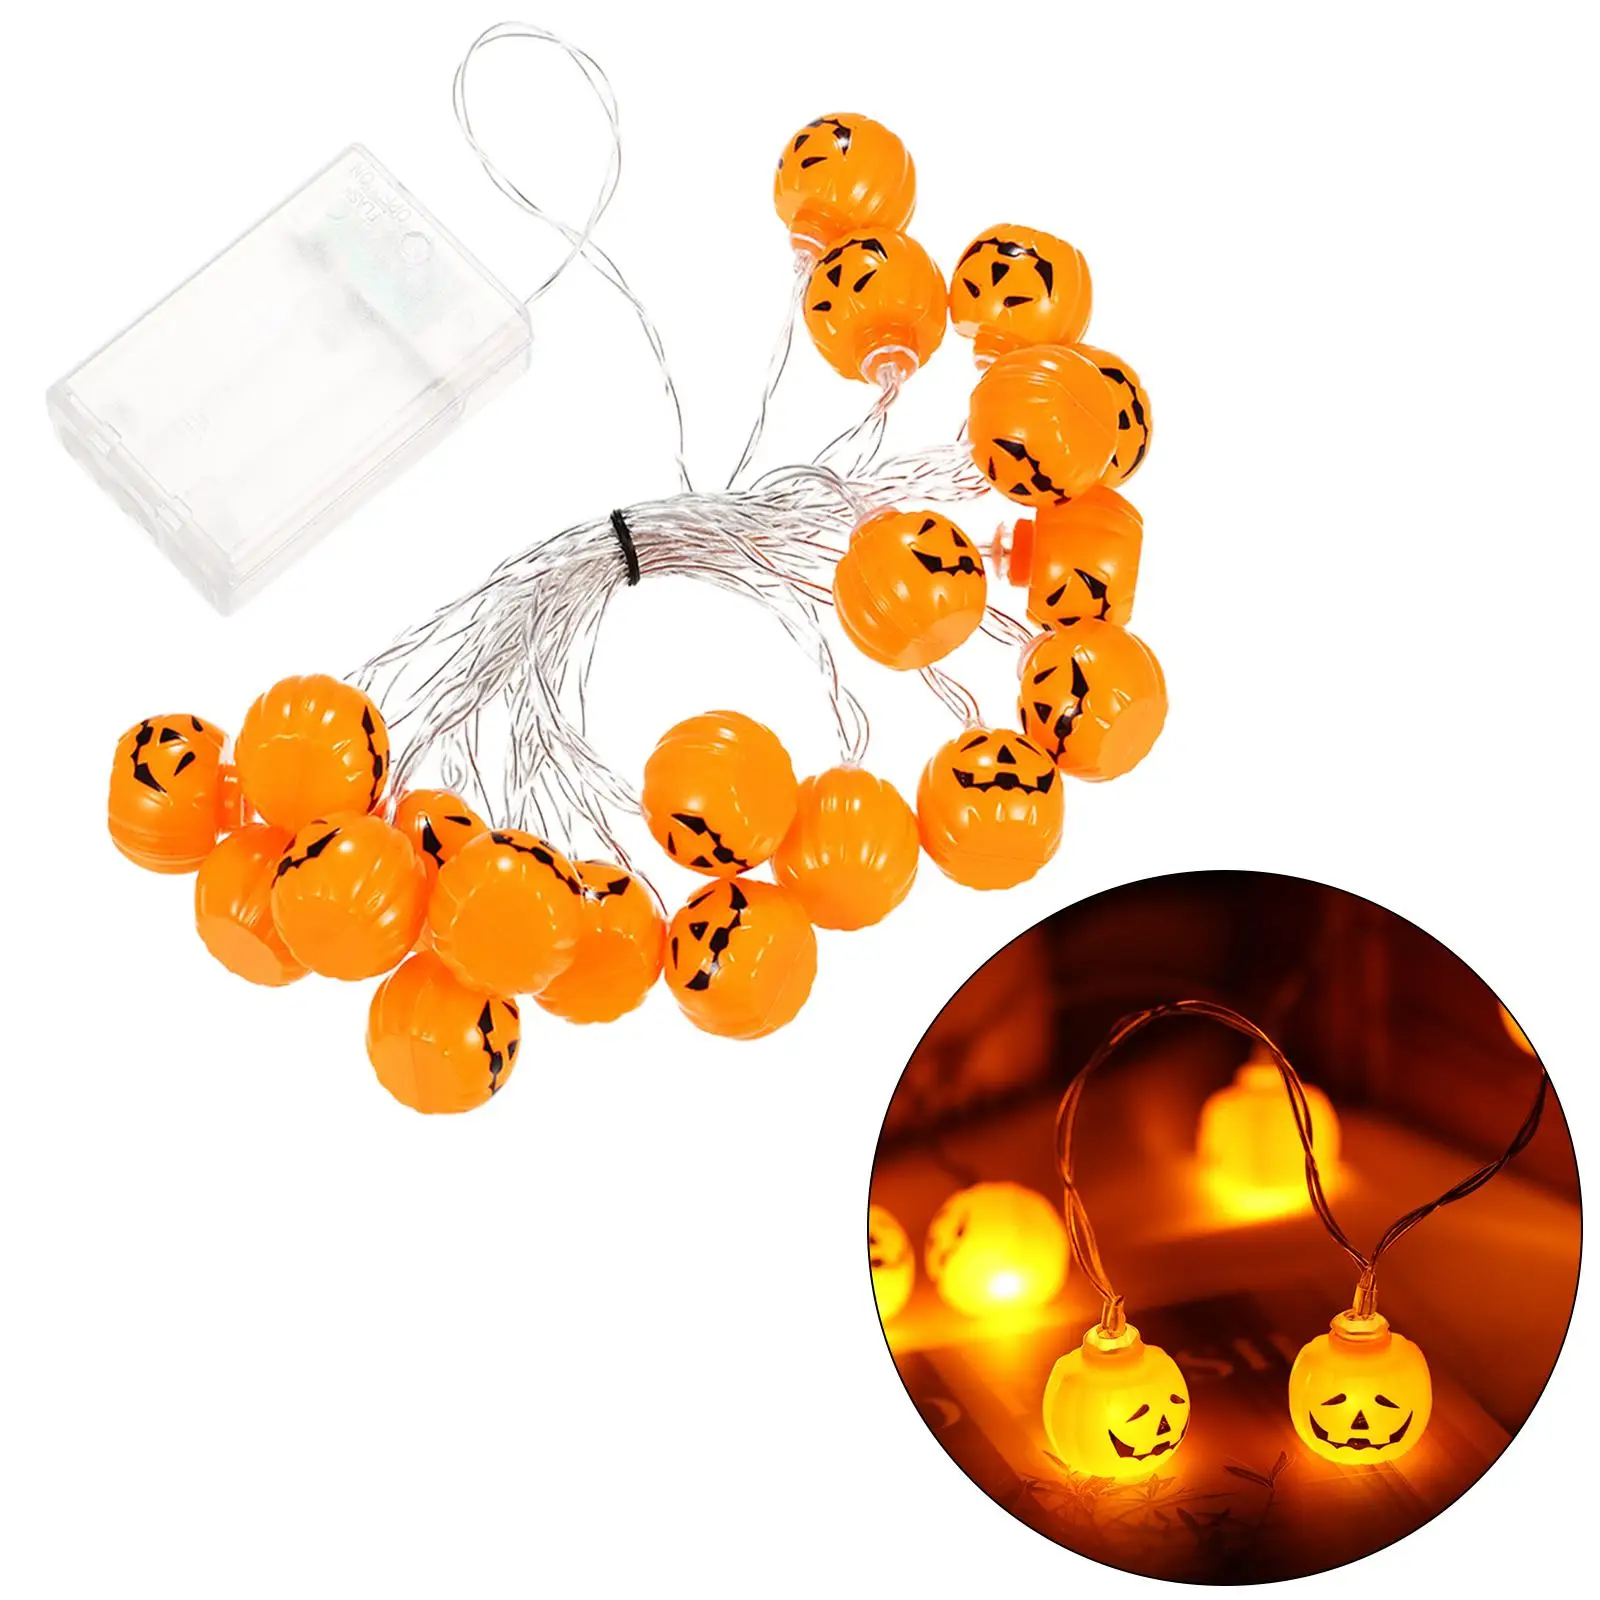 LED Halloween String Light Cute Decoration Lamp Festival Battery Powered Atmosphere Light for Lawn Home Party Nursery Ornaments